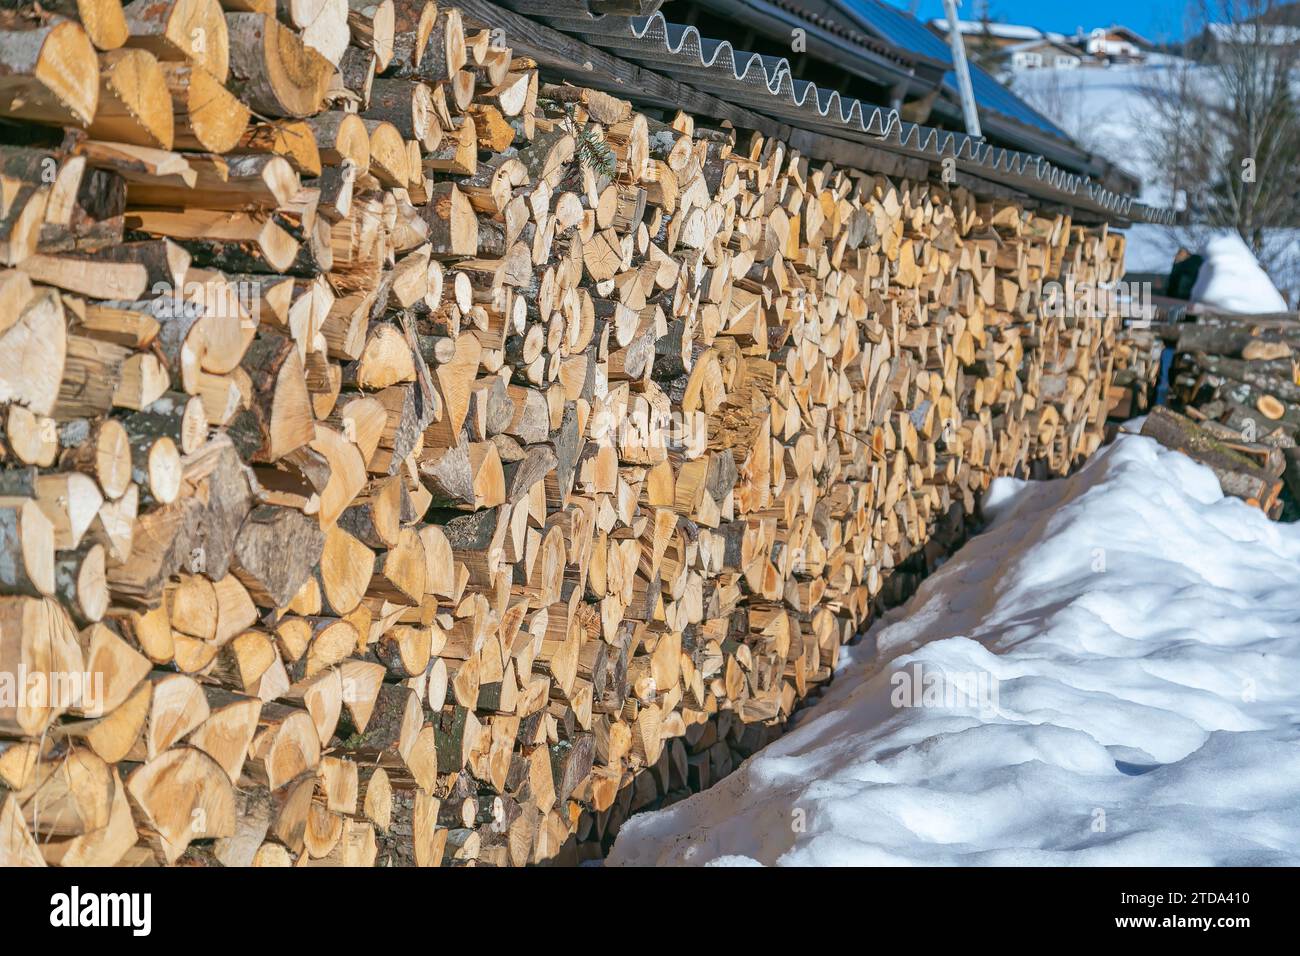 Firewood storage for the winter under a shed outside in a snowy winter place. Stock Photo